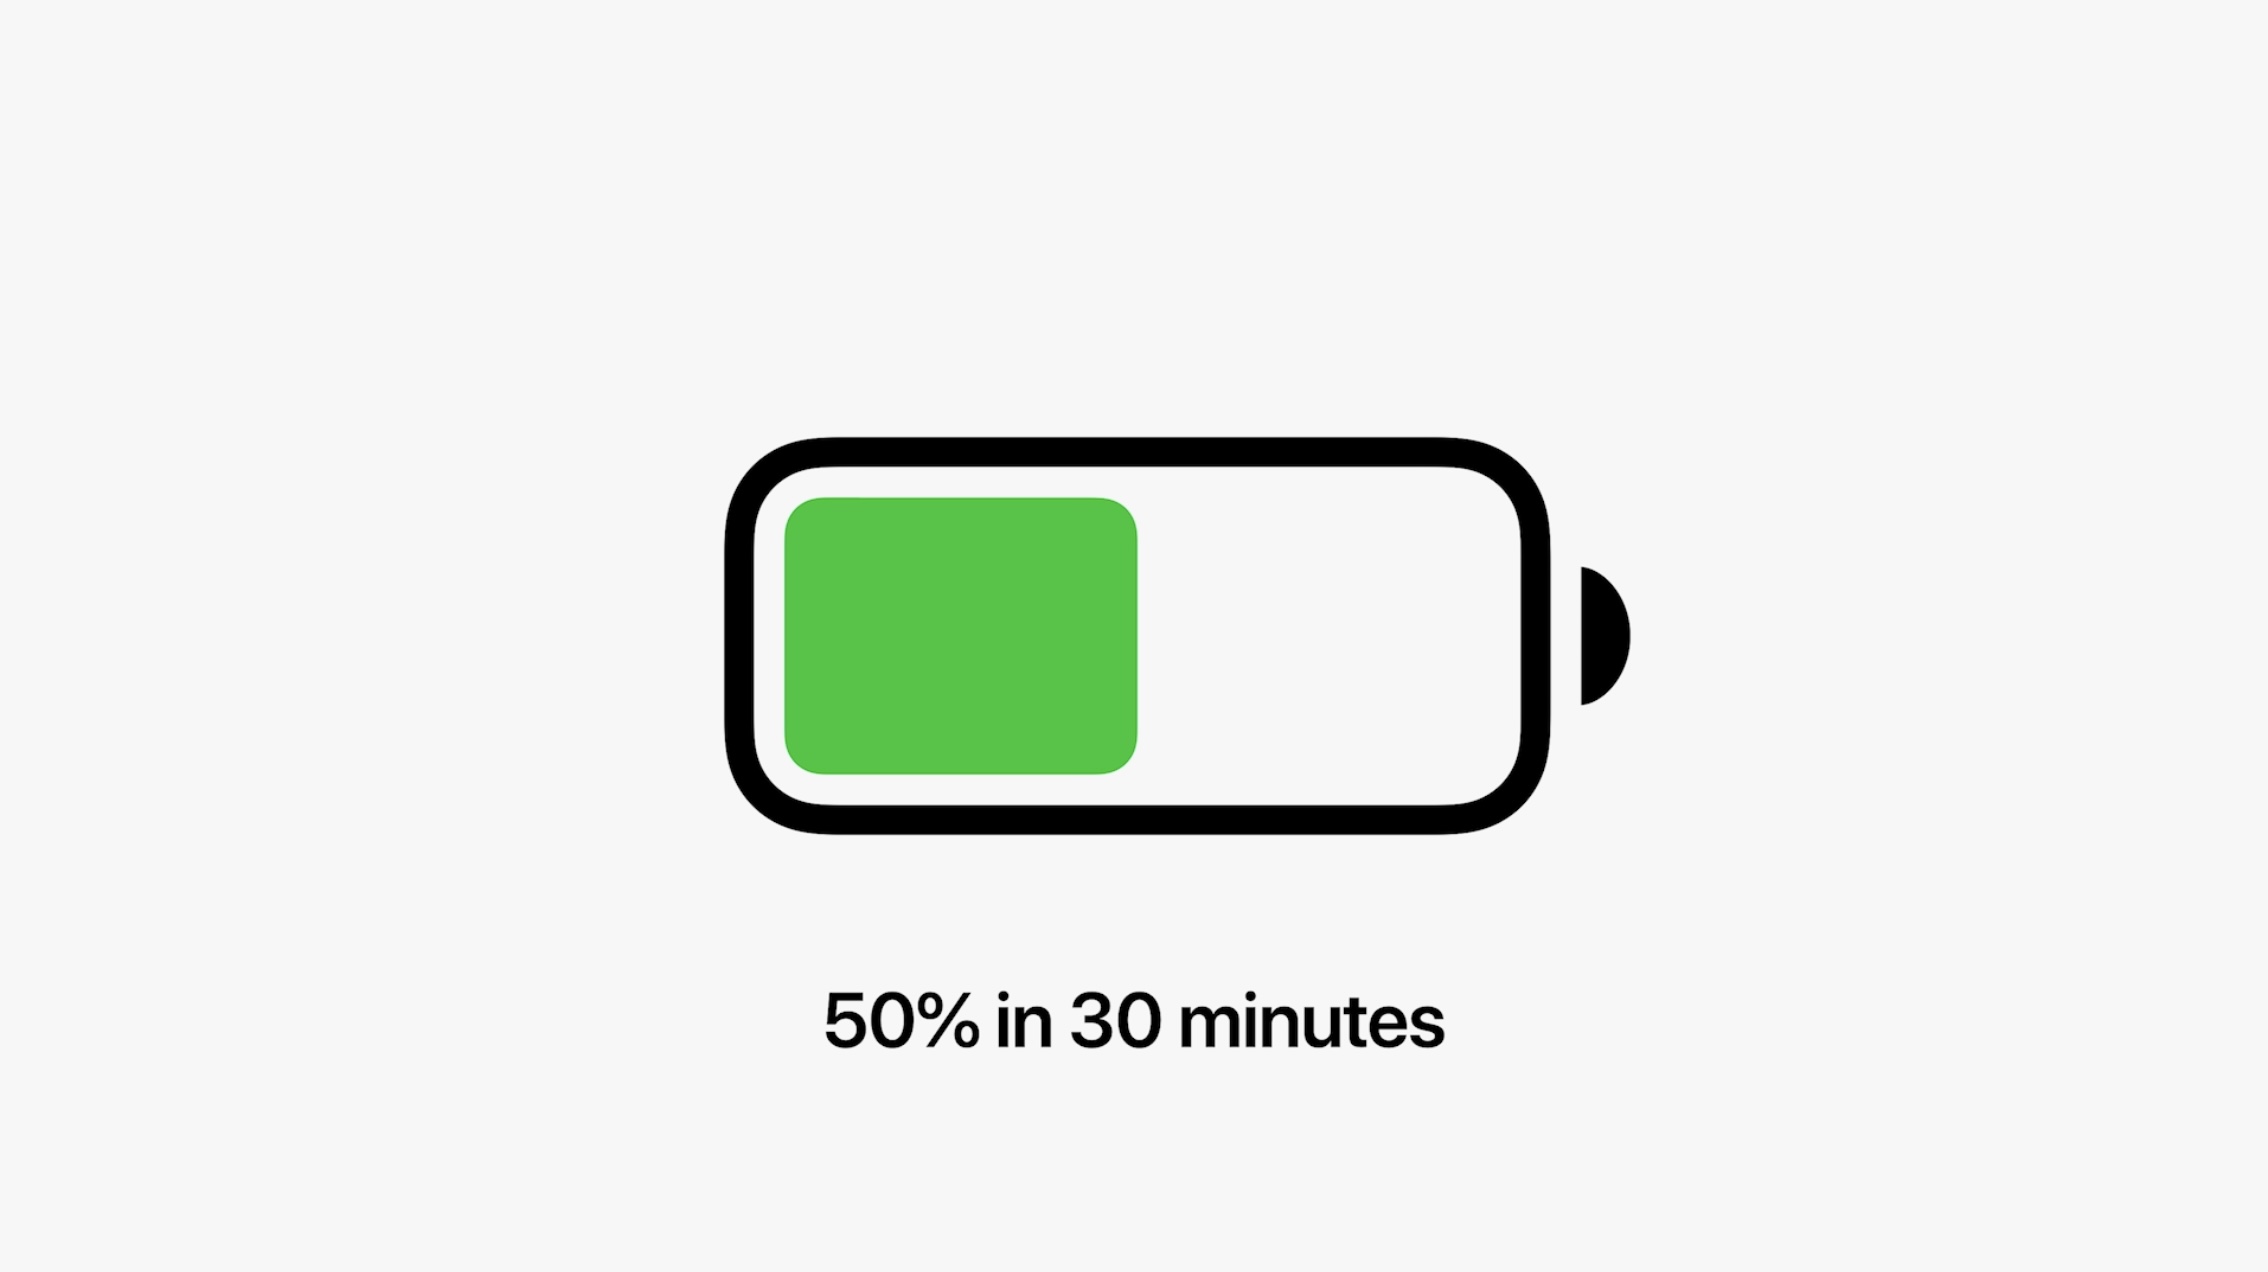 MacBook Pro battery life fast charge